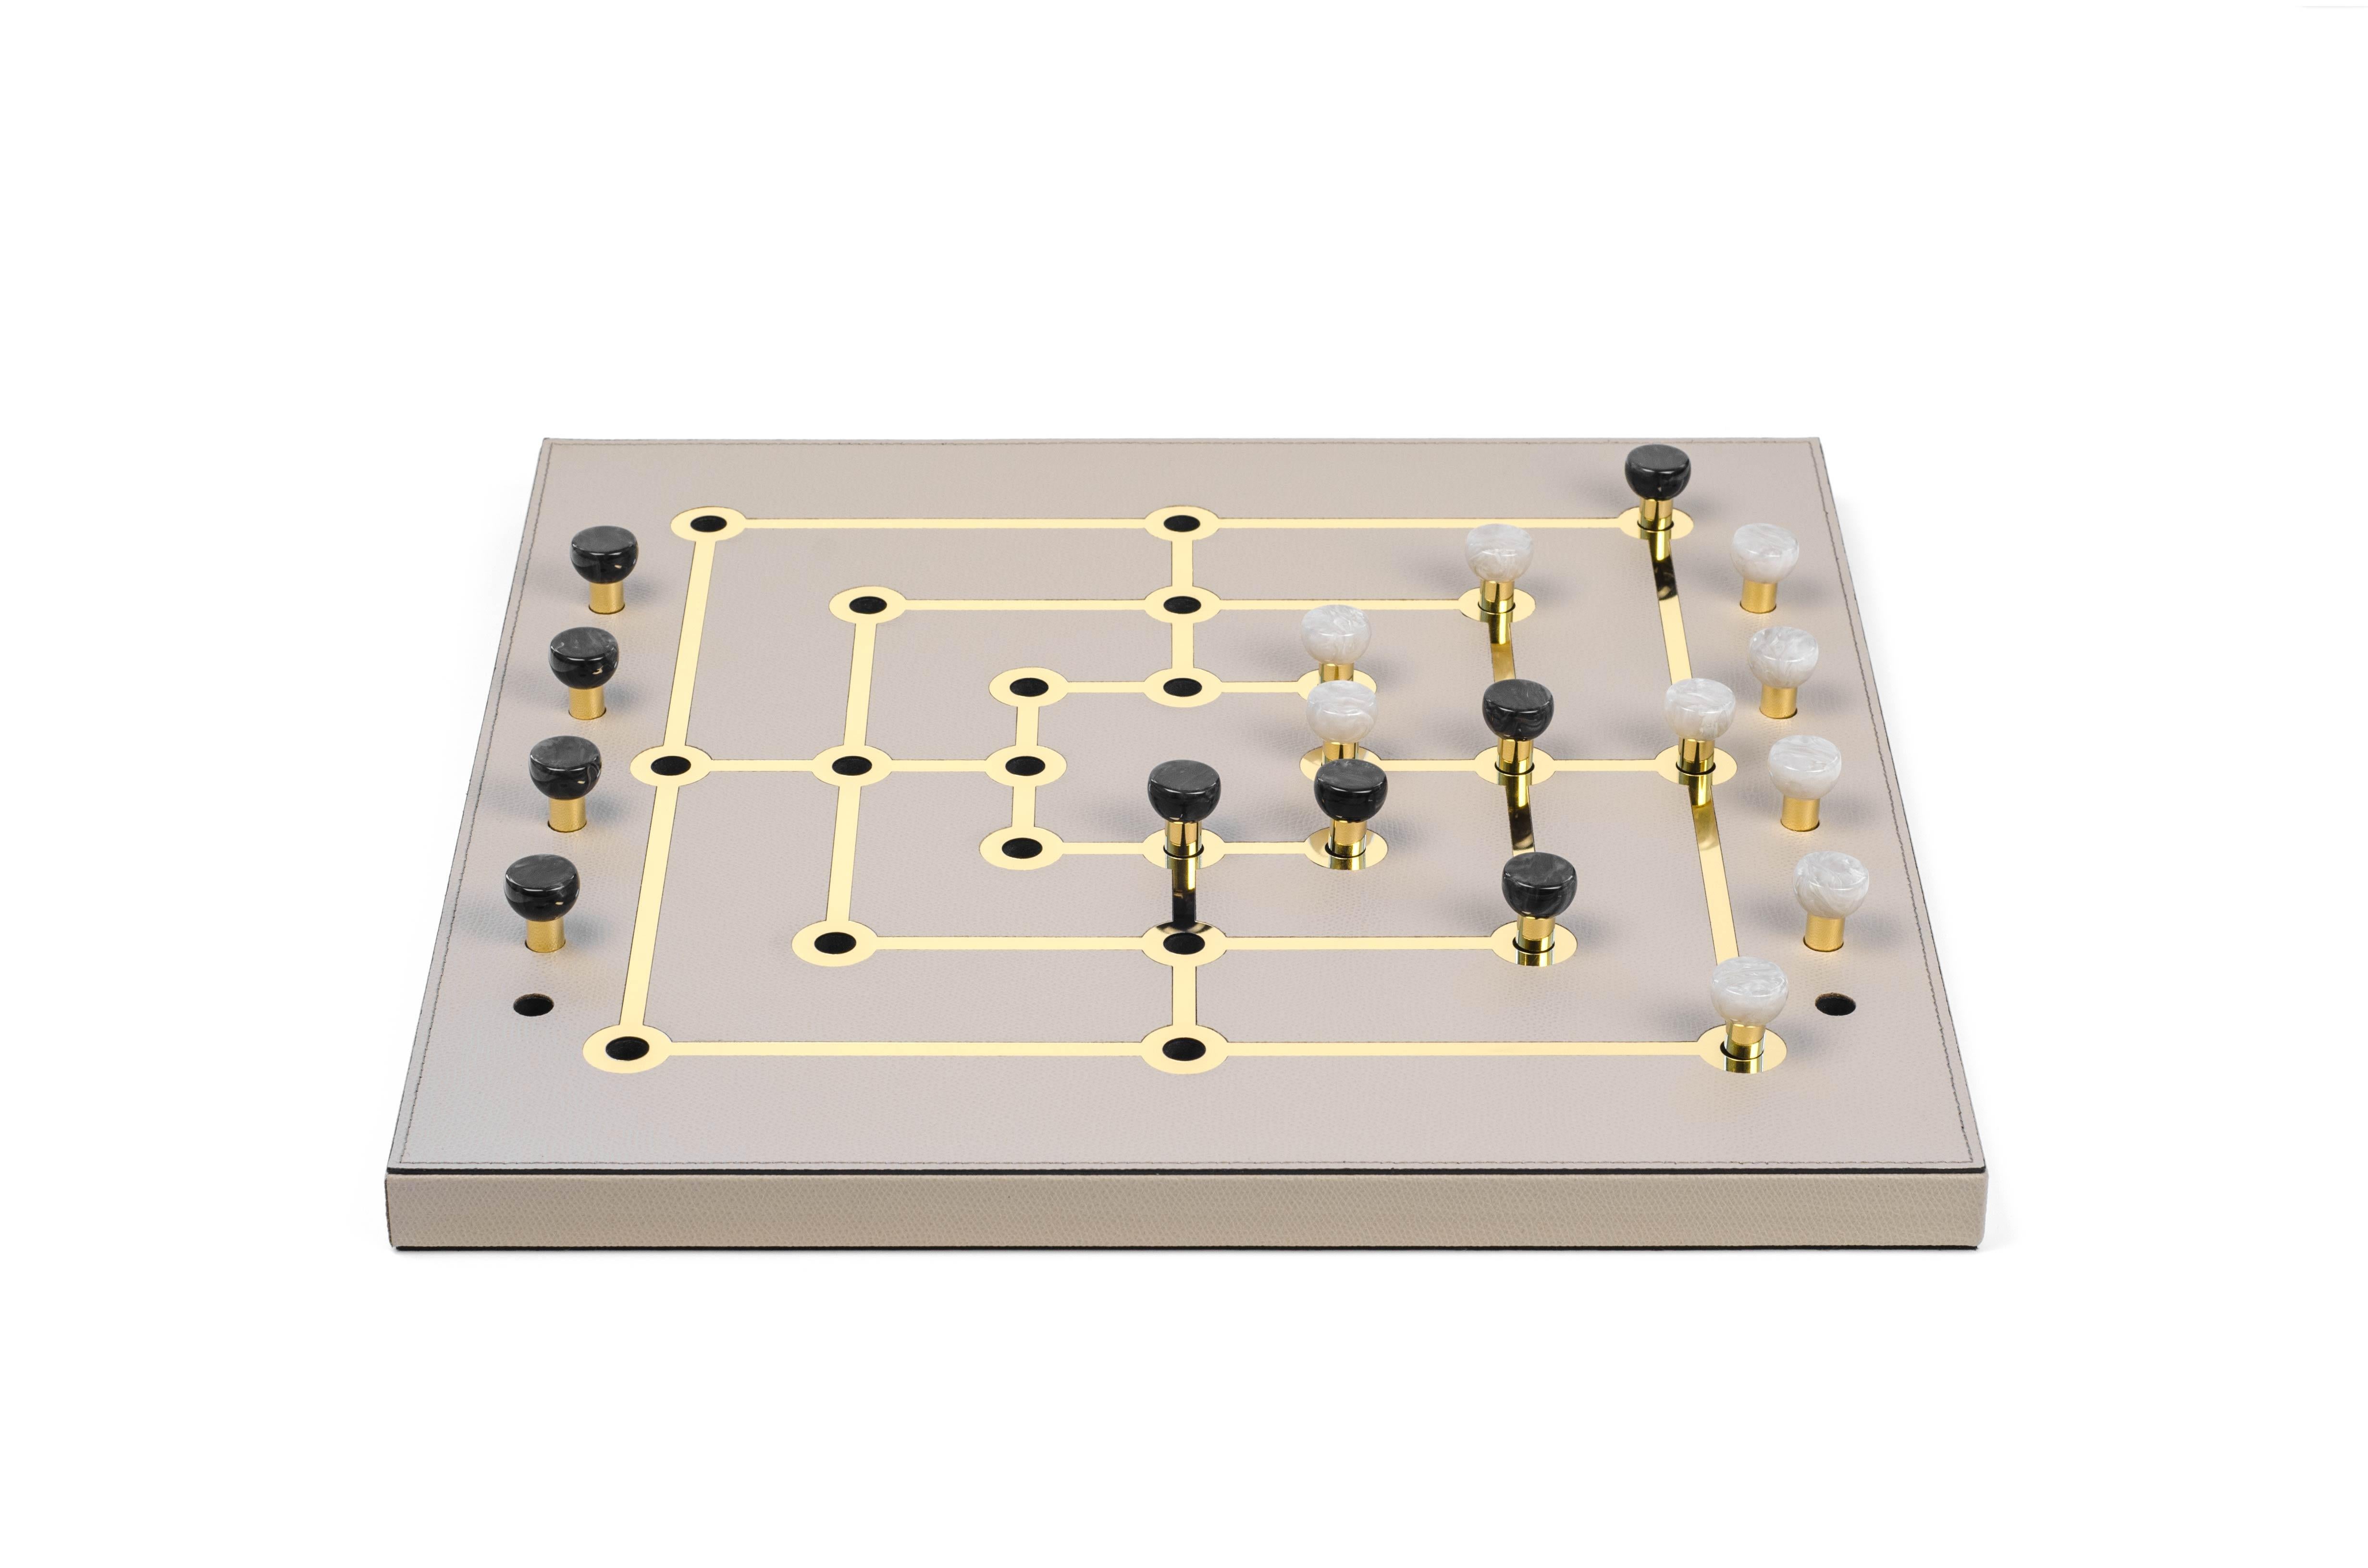 We are glad to welcome aboard our leisure collection the Mill game.

This new brilliant strategy board game is crafted with a luxury field covered in soft calf leather embellished by shiny gold details. The gold brilliance and the eco-shell pawns